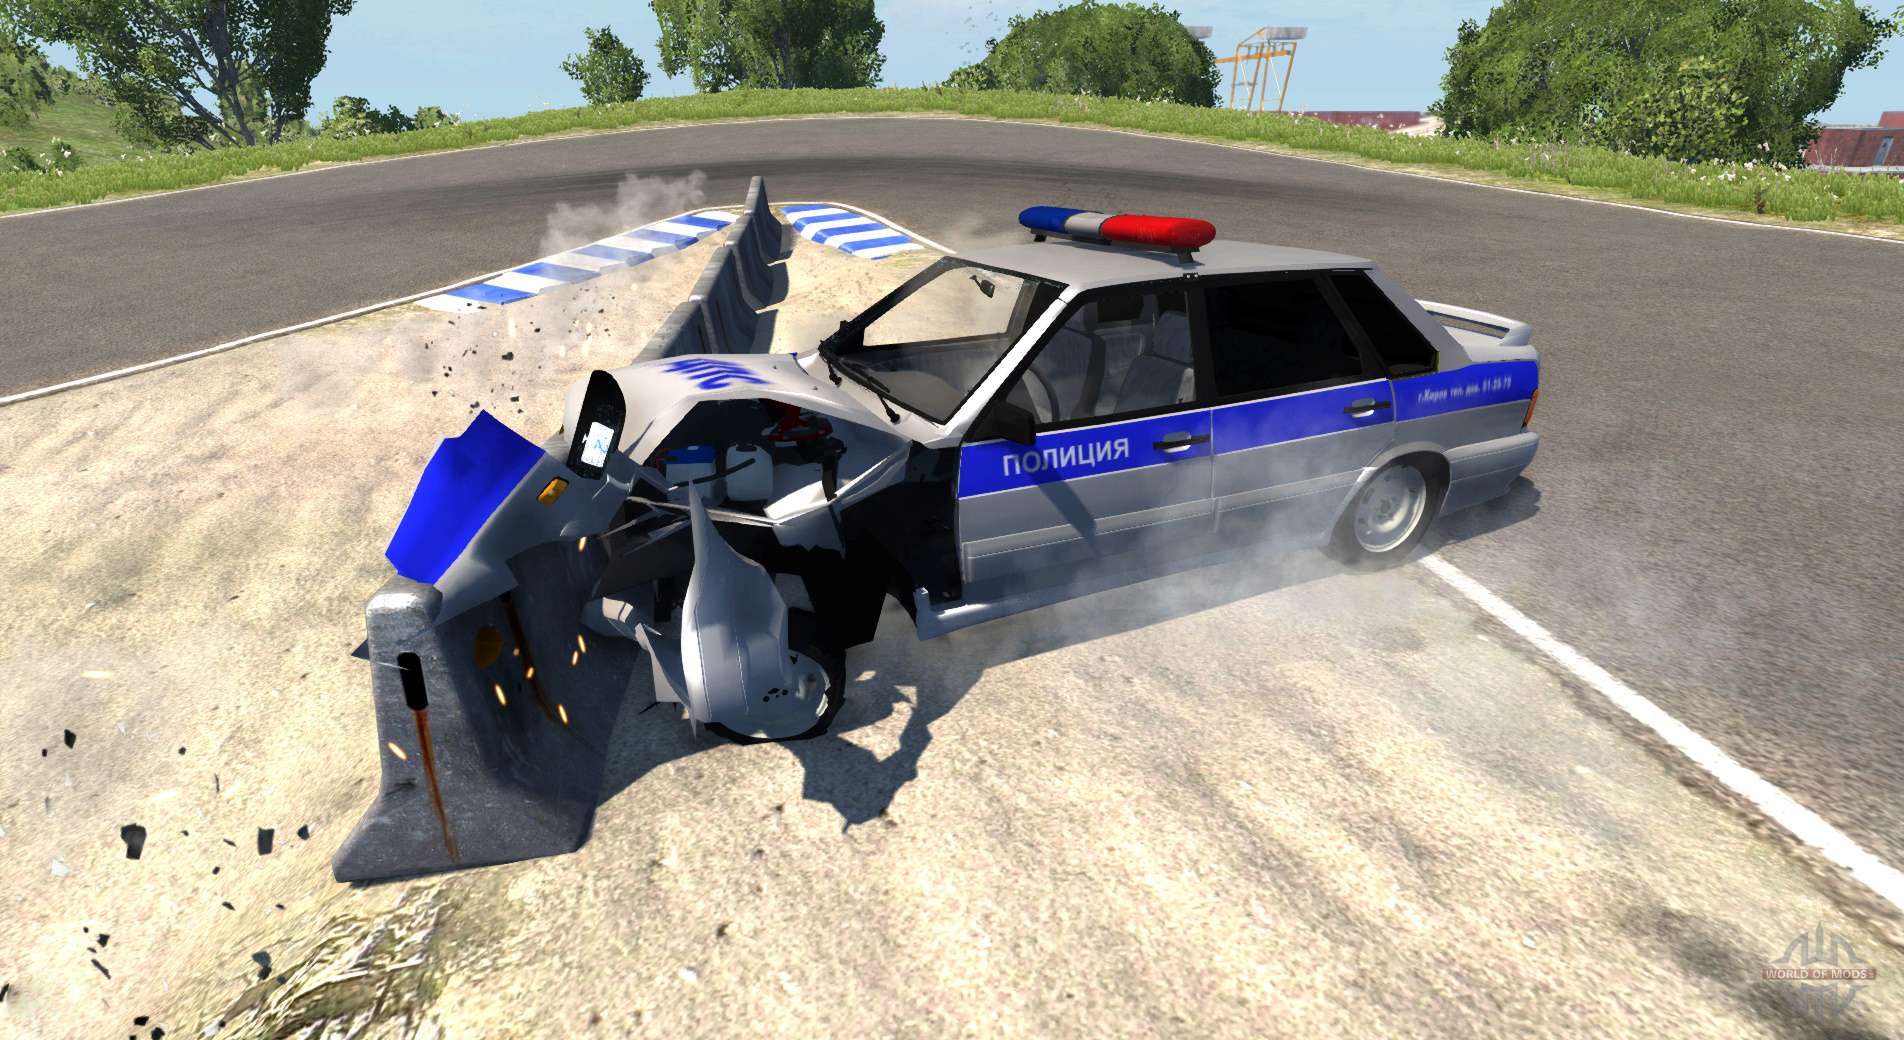 Beamng drive полицейские машины. ВАЗ-2115 полиция для BEAMNG Drive. ВАЗ 2115 BEAMNG Police.